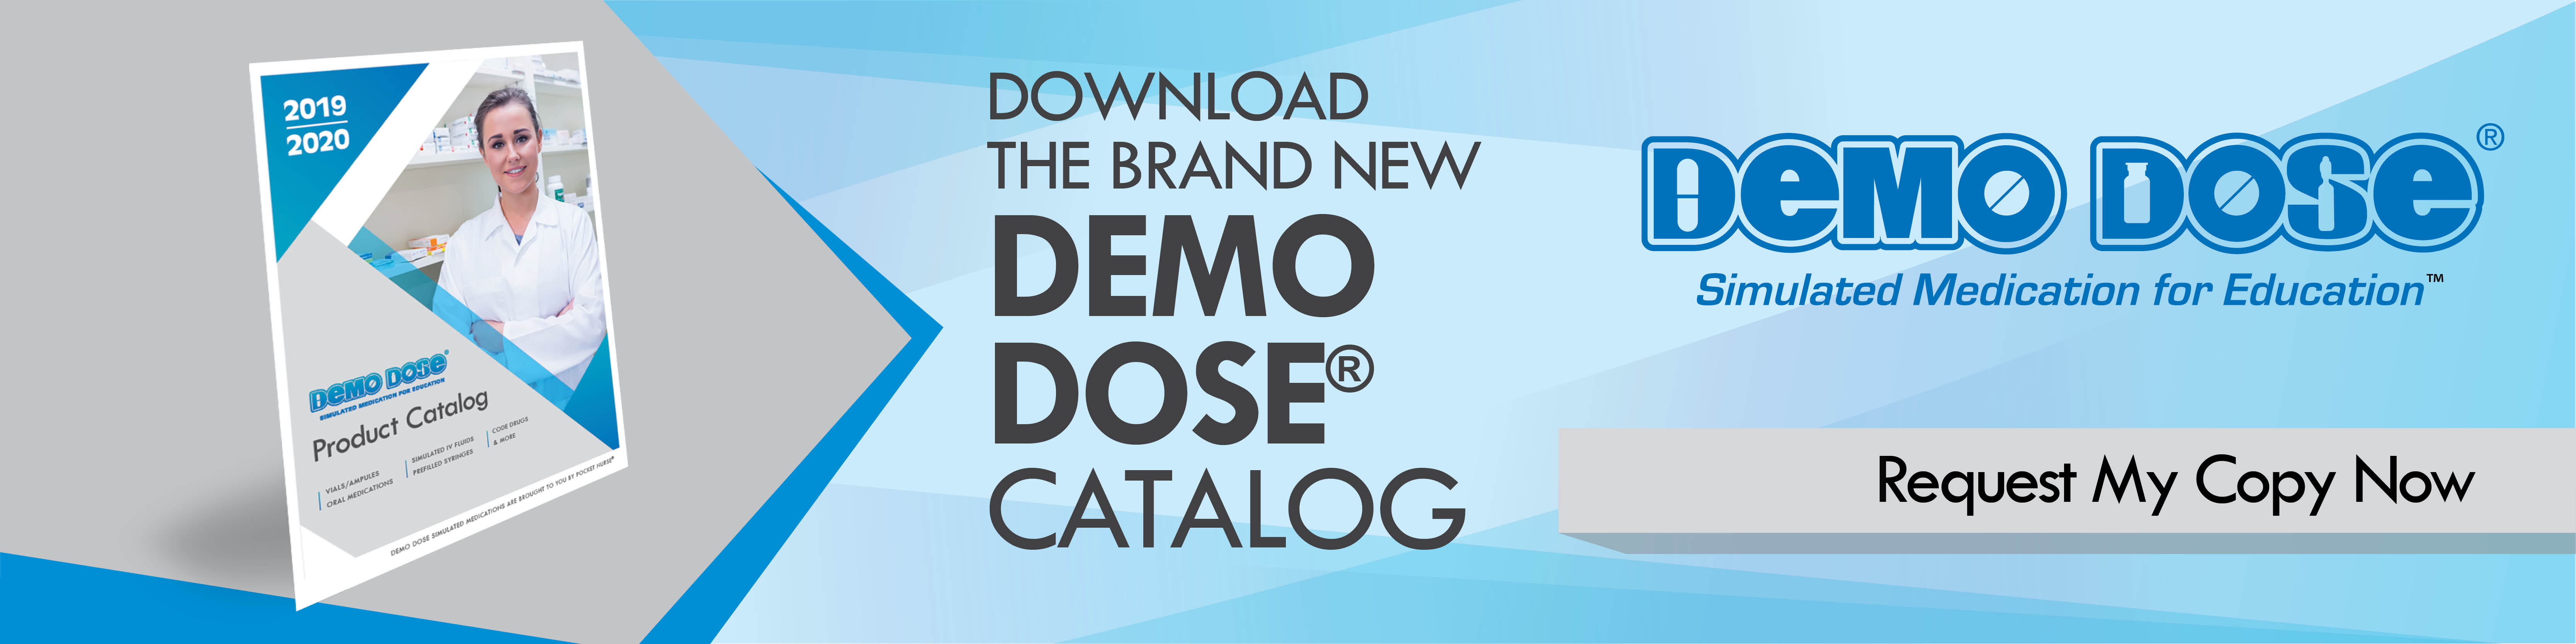 BL_CALL TO ACTION_Demo Dose Catalog 2019_1600 X 400